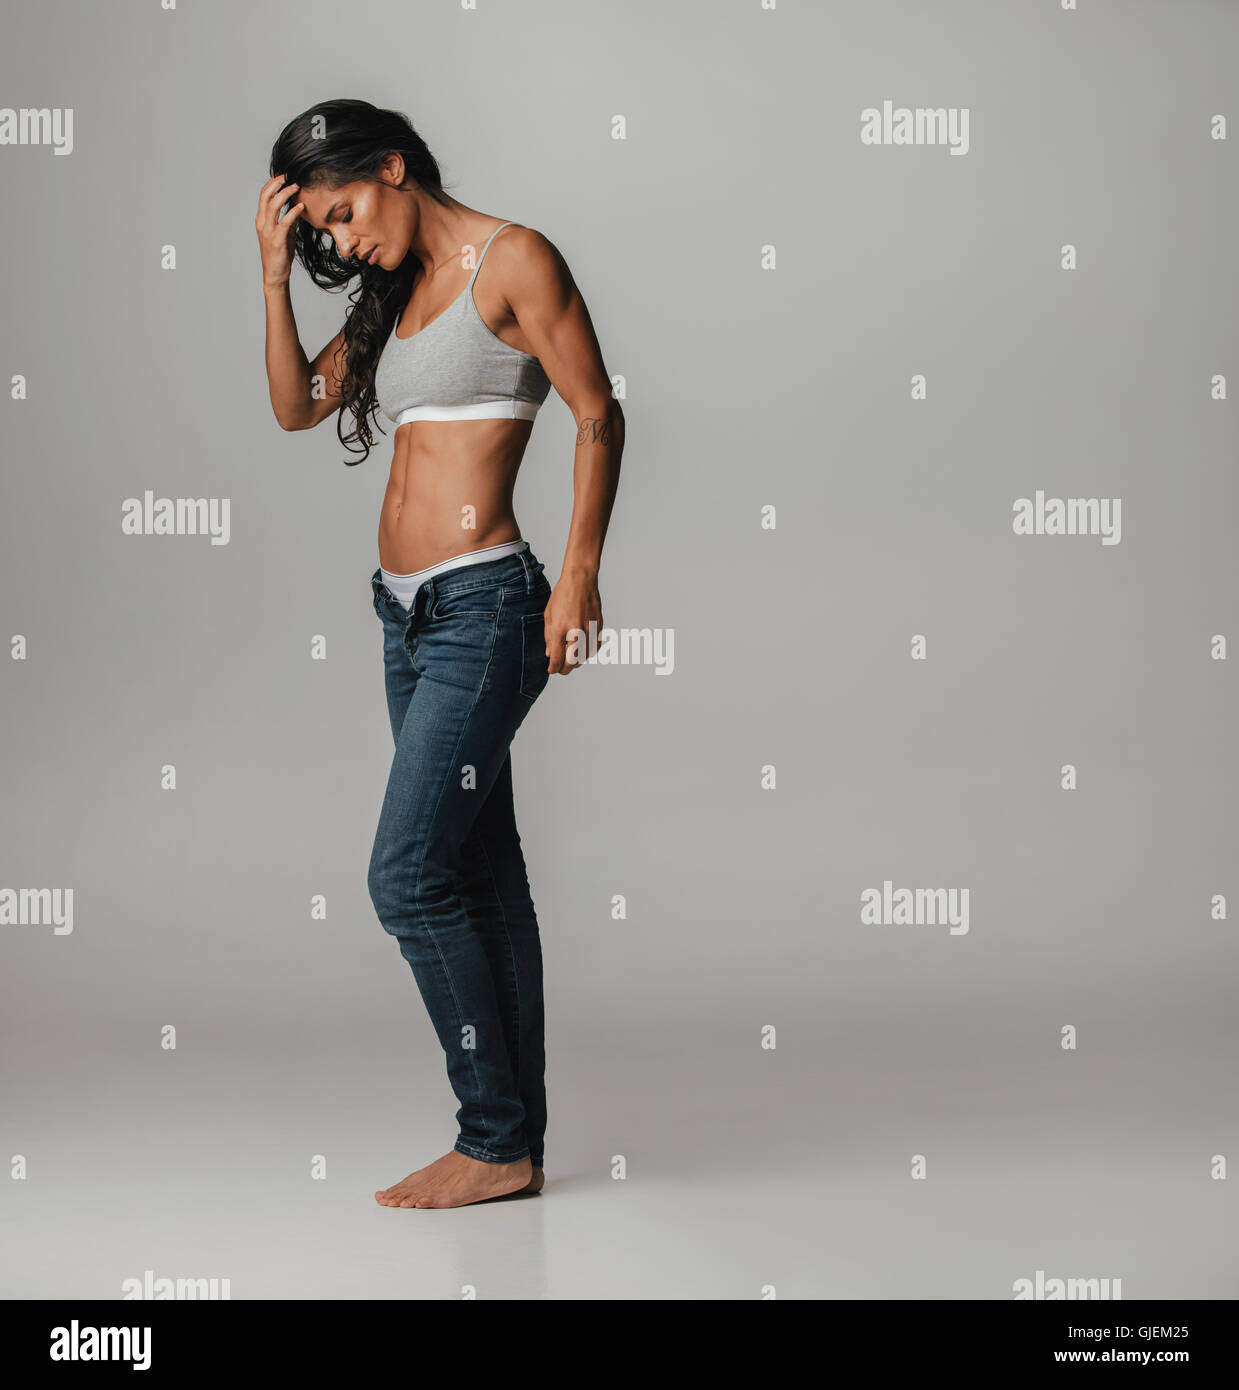 Fit young woman in unbuttoned tight blue jeans and gray sports bra with hand on head looking at feet Stock Photo